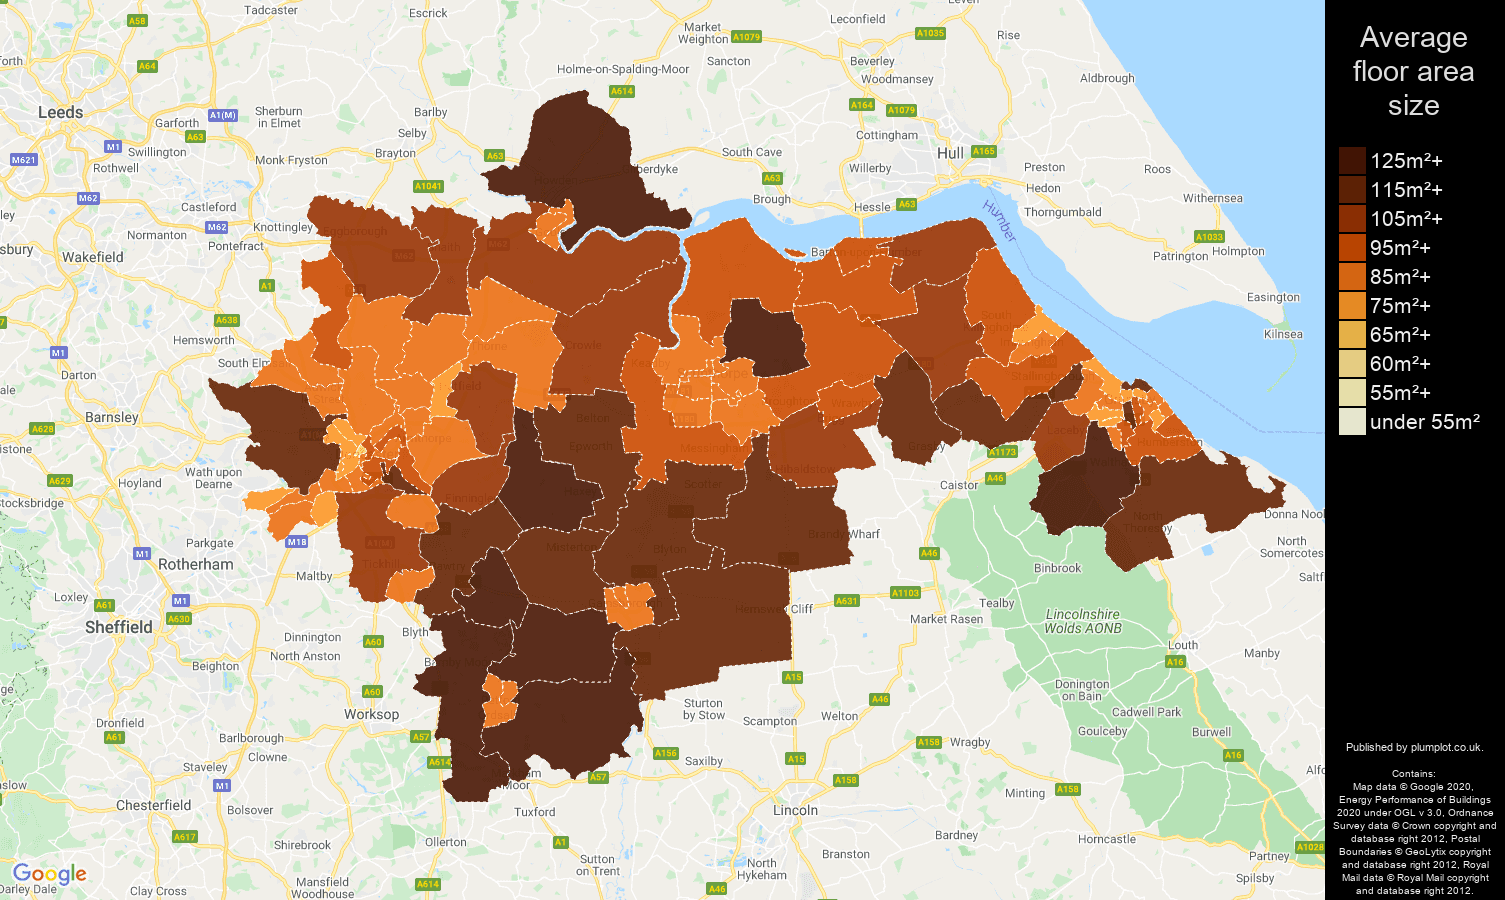 Doncaster map of average floor area size of houses